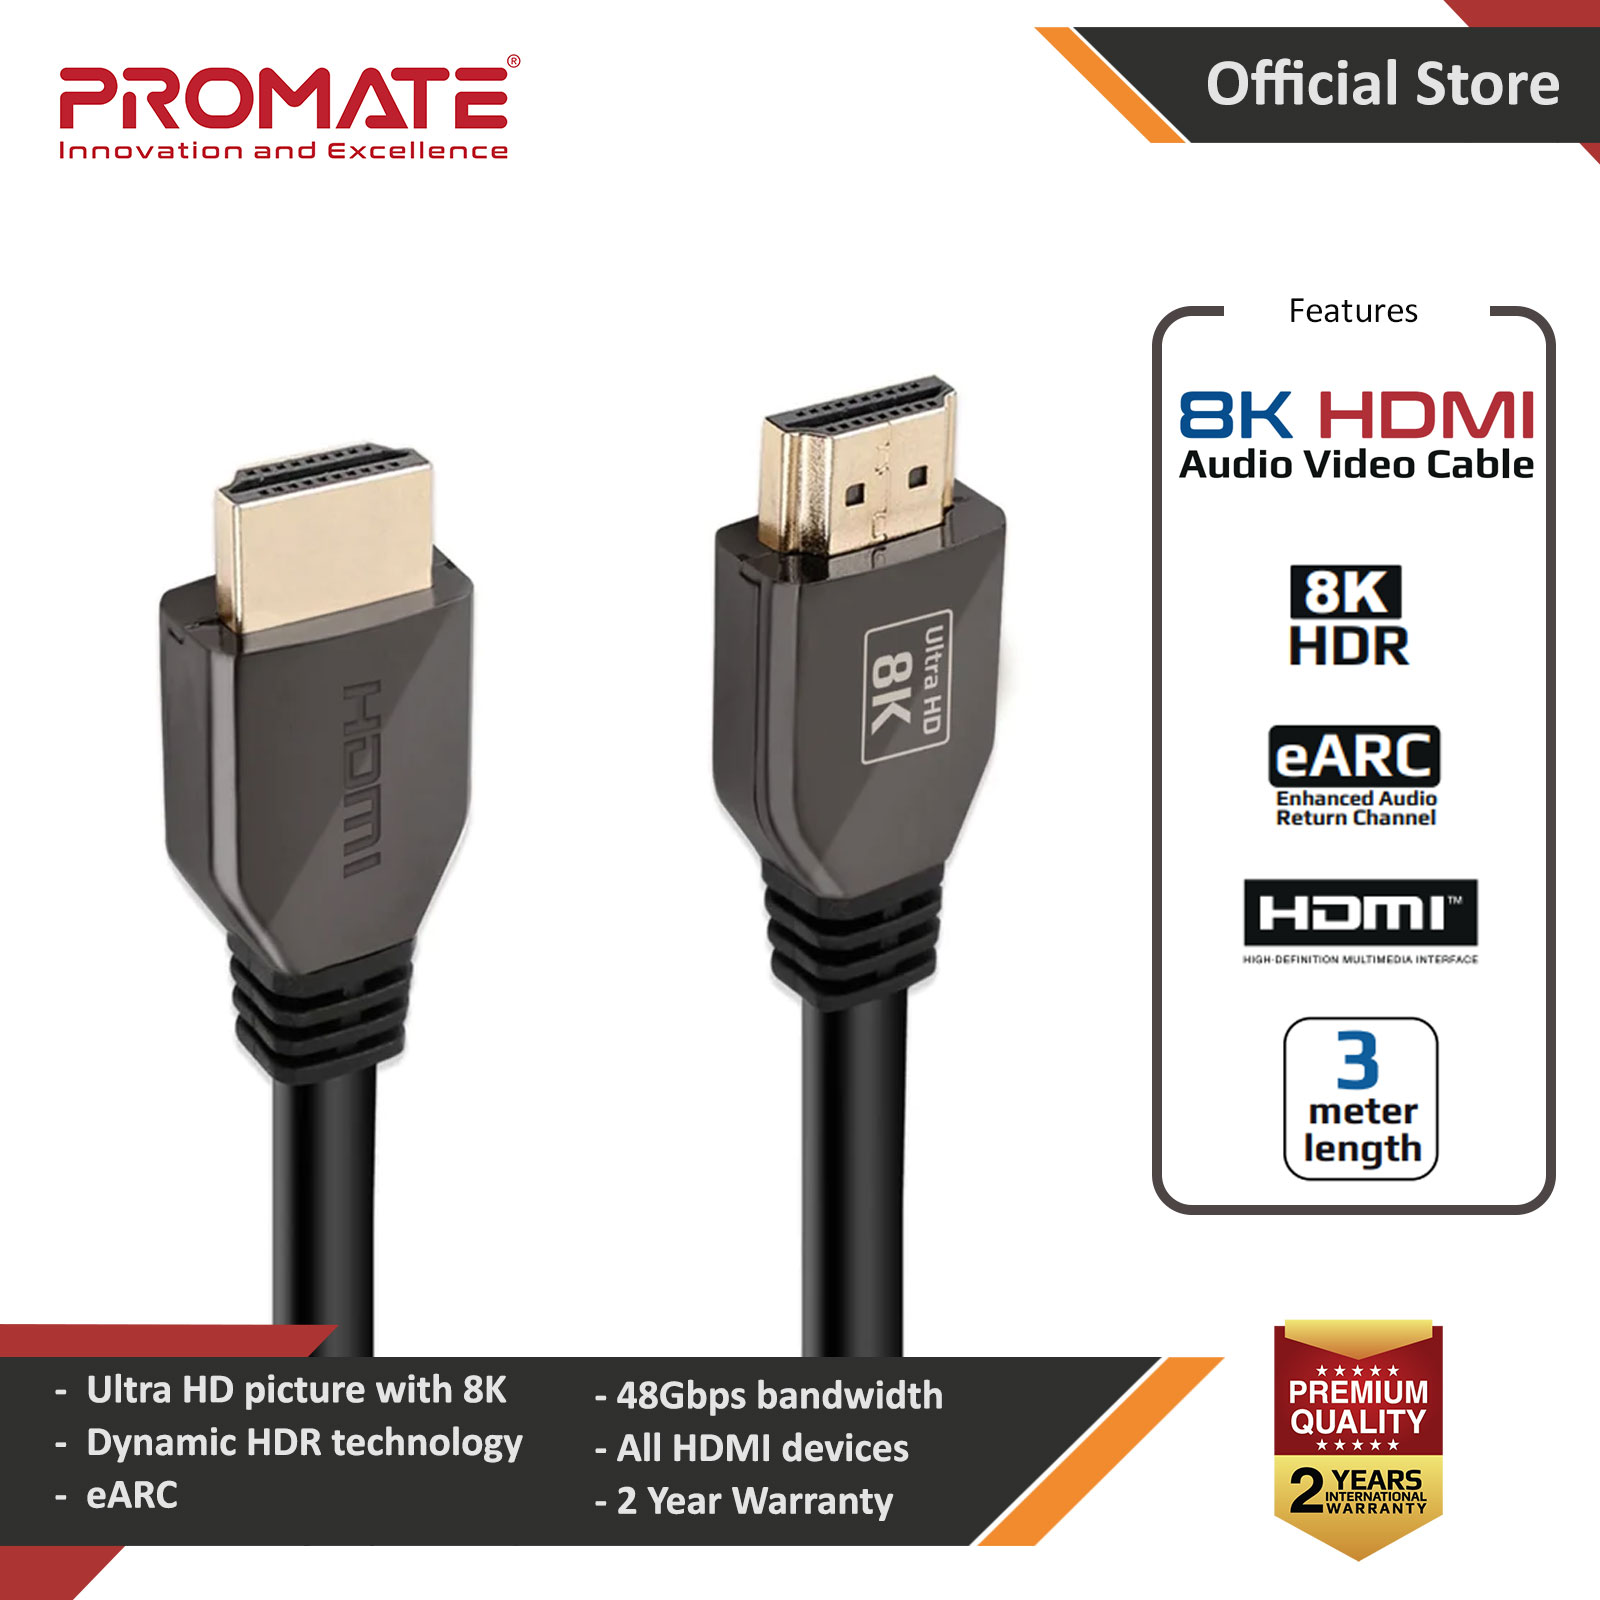 Picture of PROMATE ProLink8K-300 Ultra HD High Speed 8K HDMI 2.1 Audio Video Cable HDR Colour Support eARC Connectivity Dolby Vision 3 meter 300cm Cable Length Red Design- Red Design Cases, Red Design Covers, iPad Cases and a wide selection of Red Design Accessories in Malaysia, Sabah, Sarawak and Singapore 